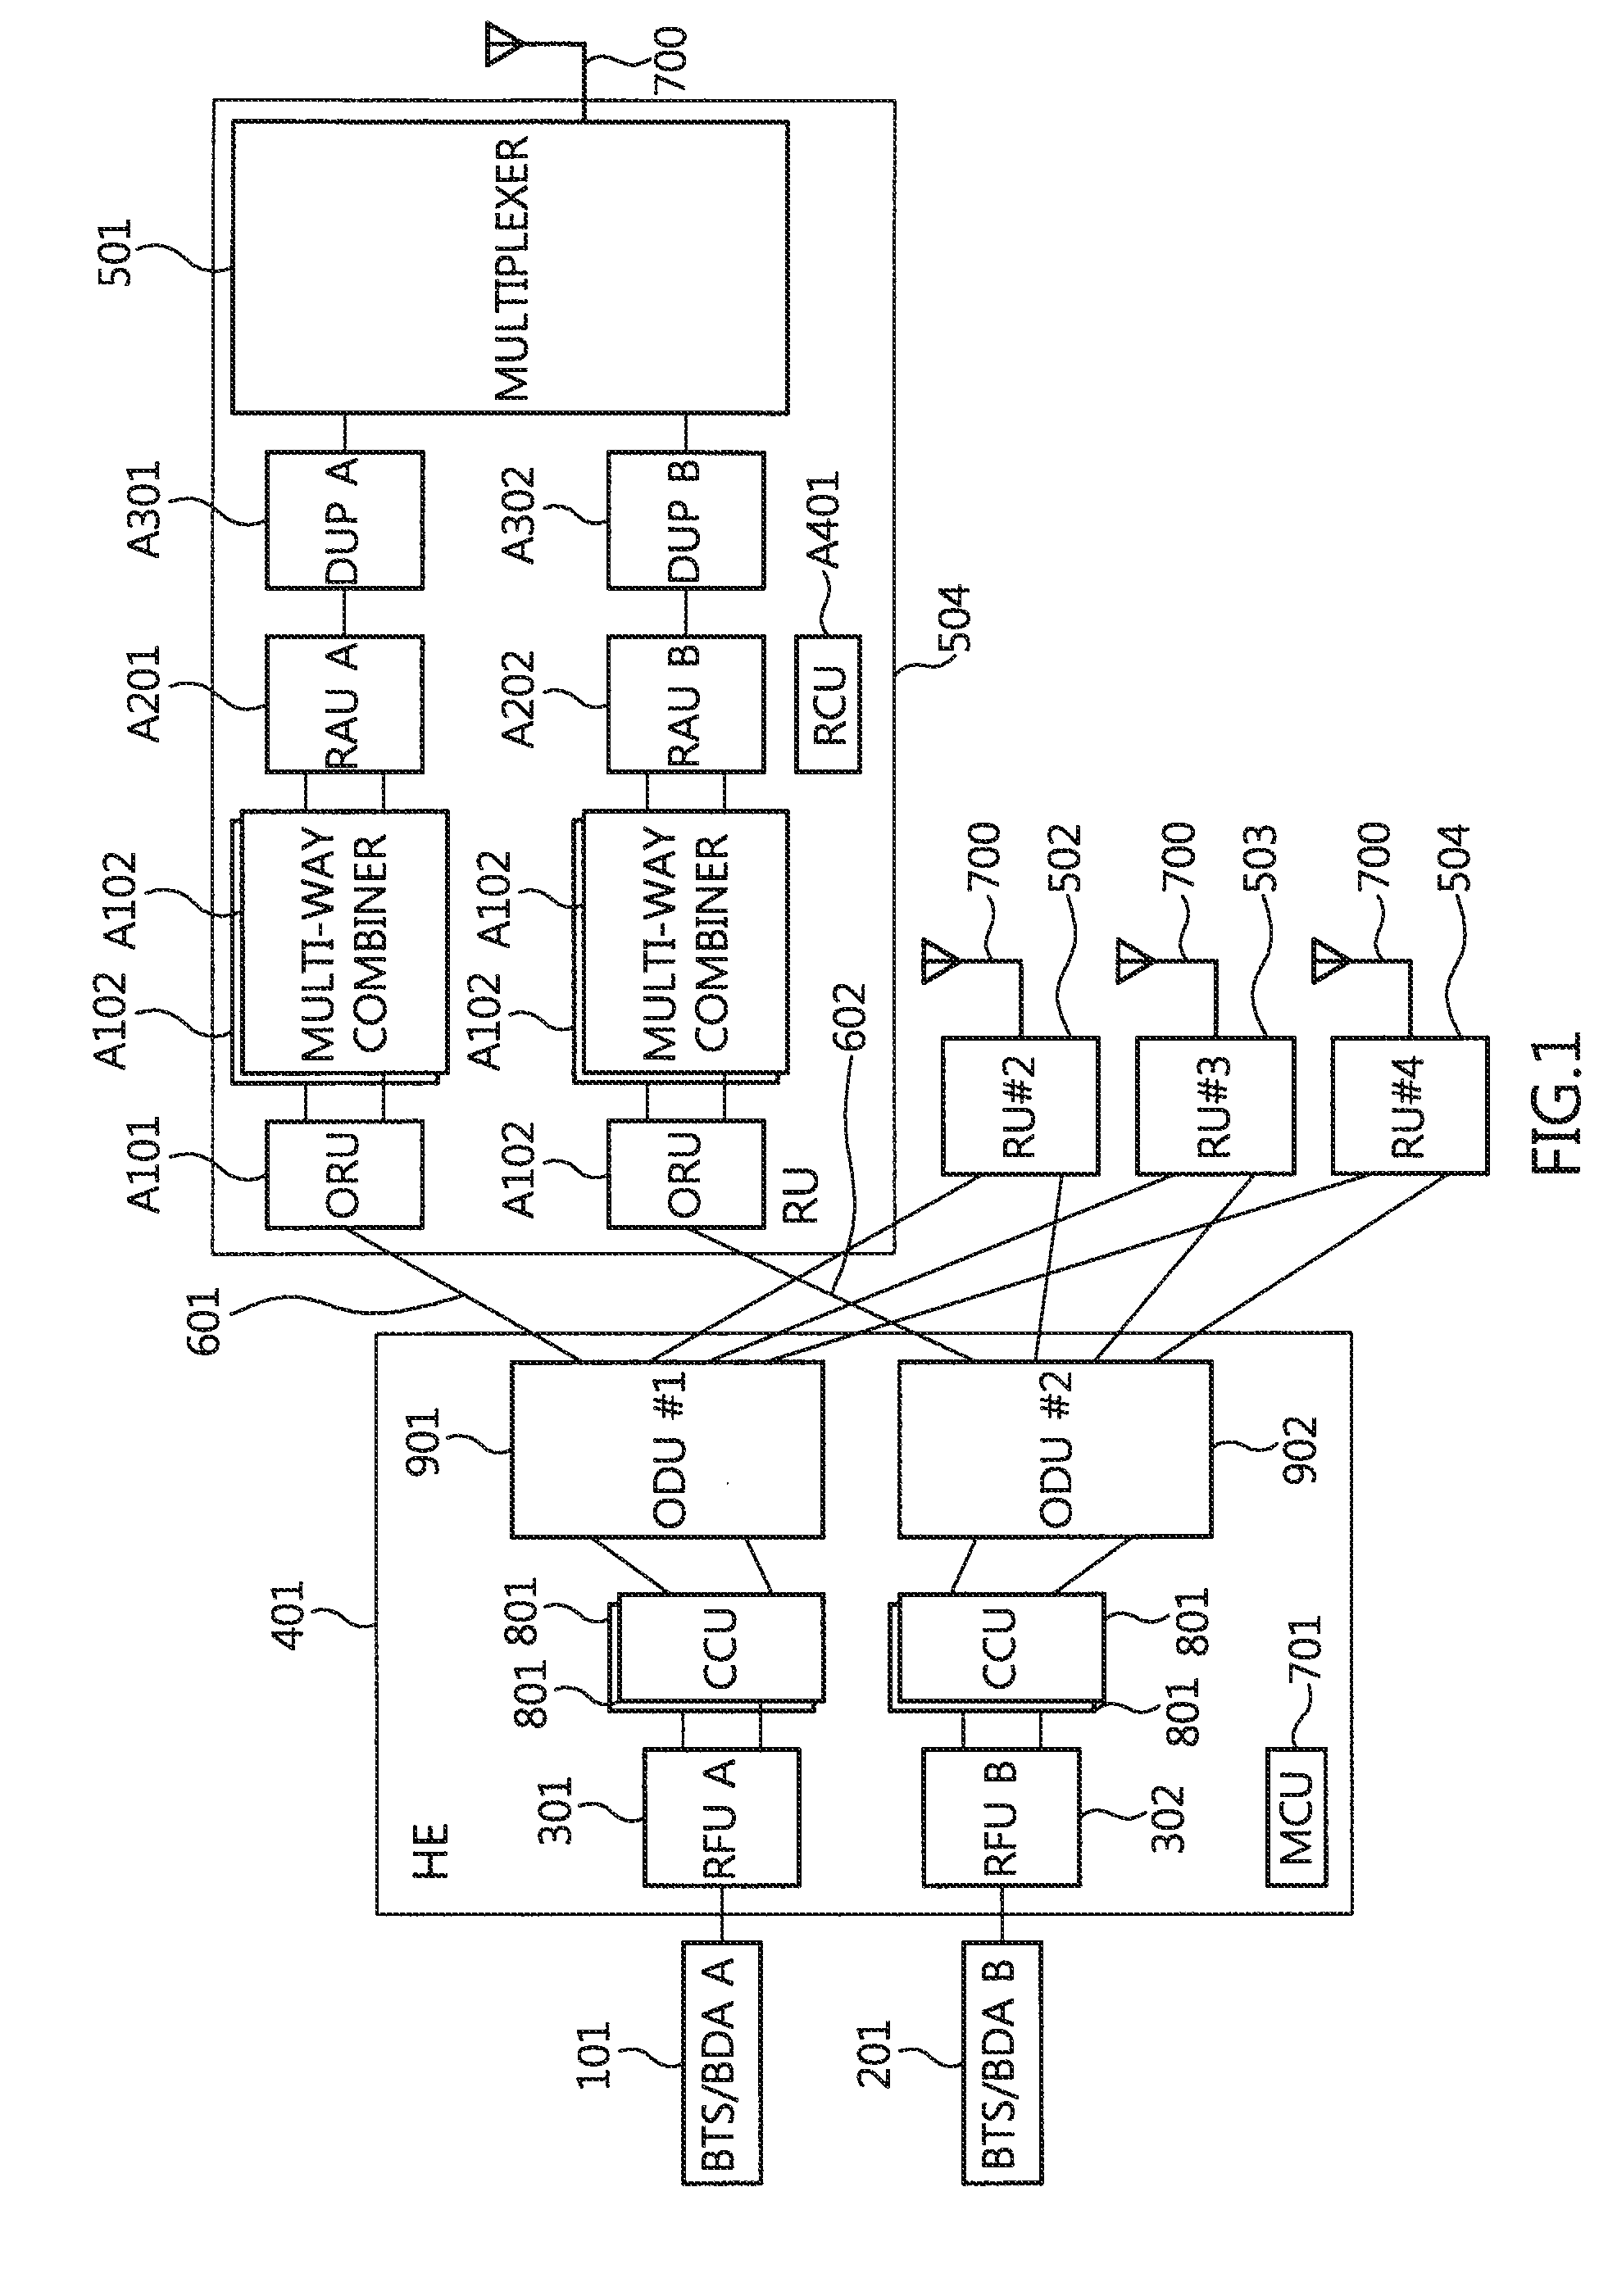 Optic distributed antenna system supporting multi-band multi-carrier service over a reduced number of optic core lines